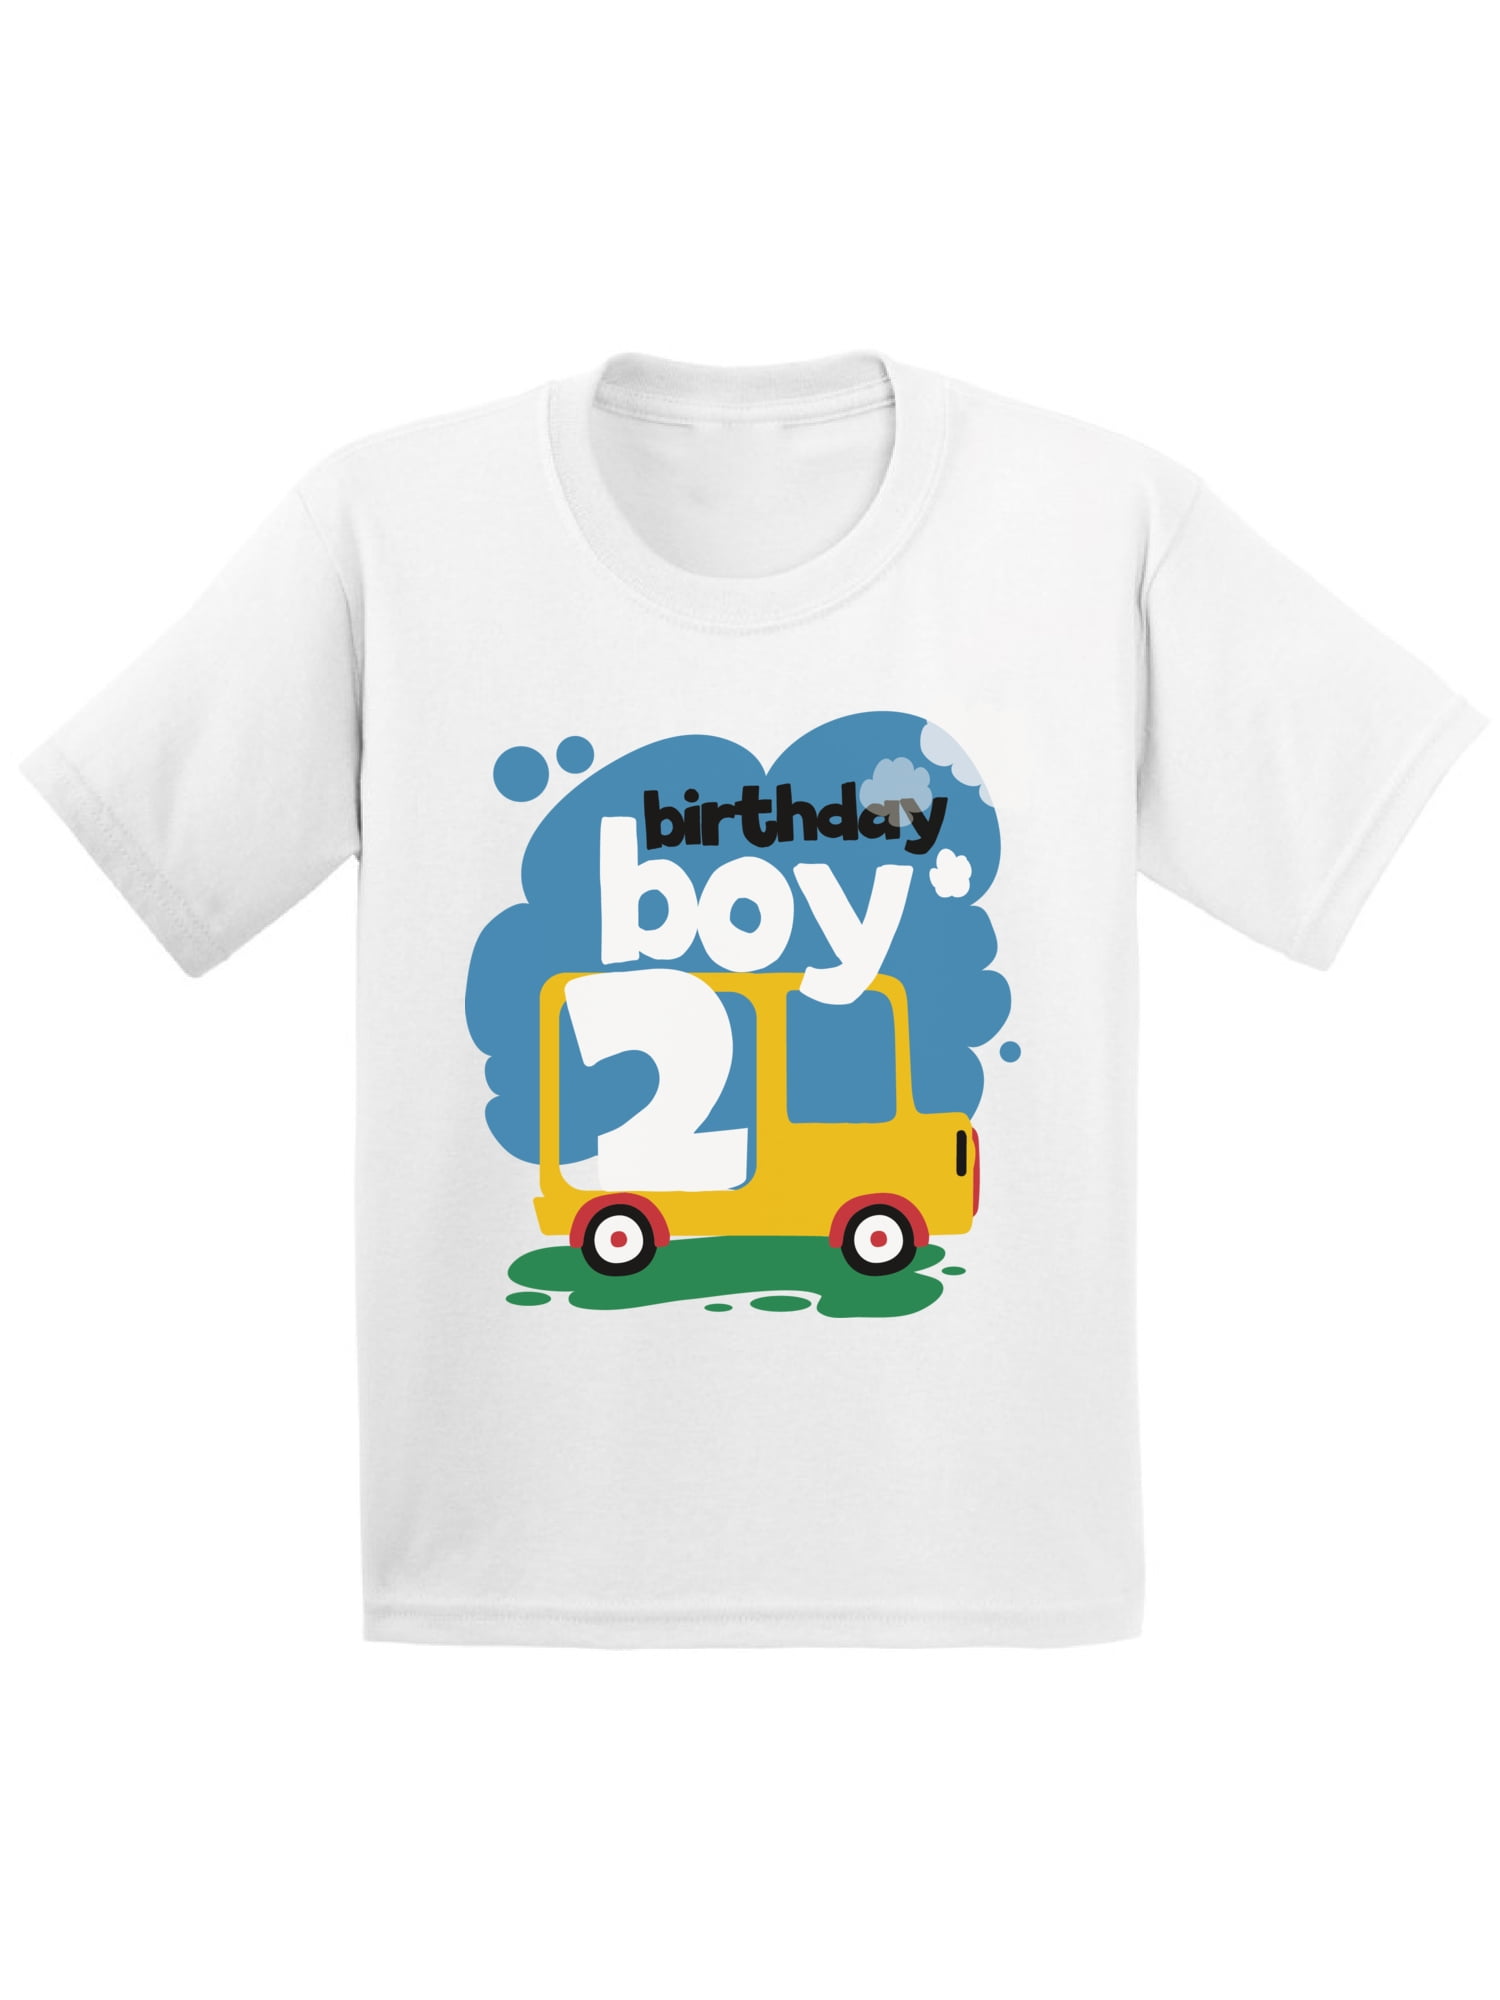 party wear for 2 year old boy